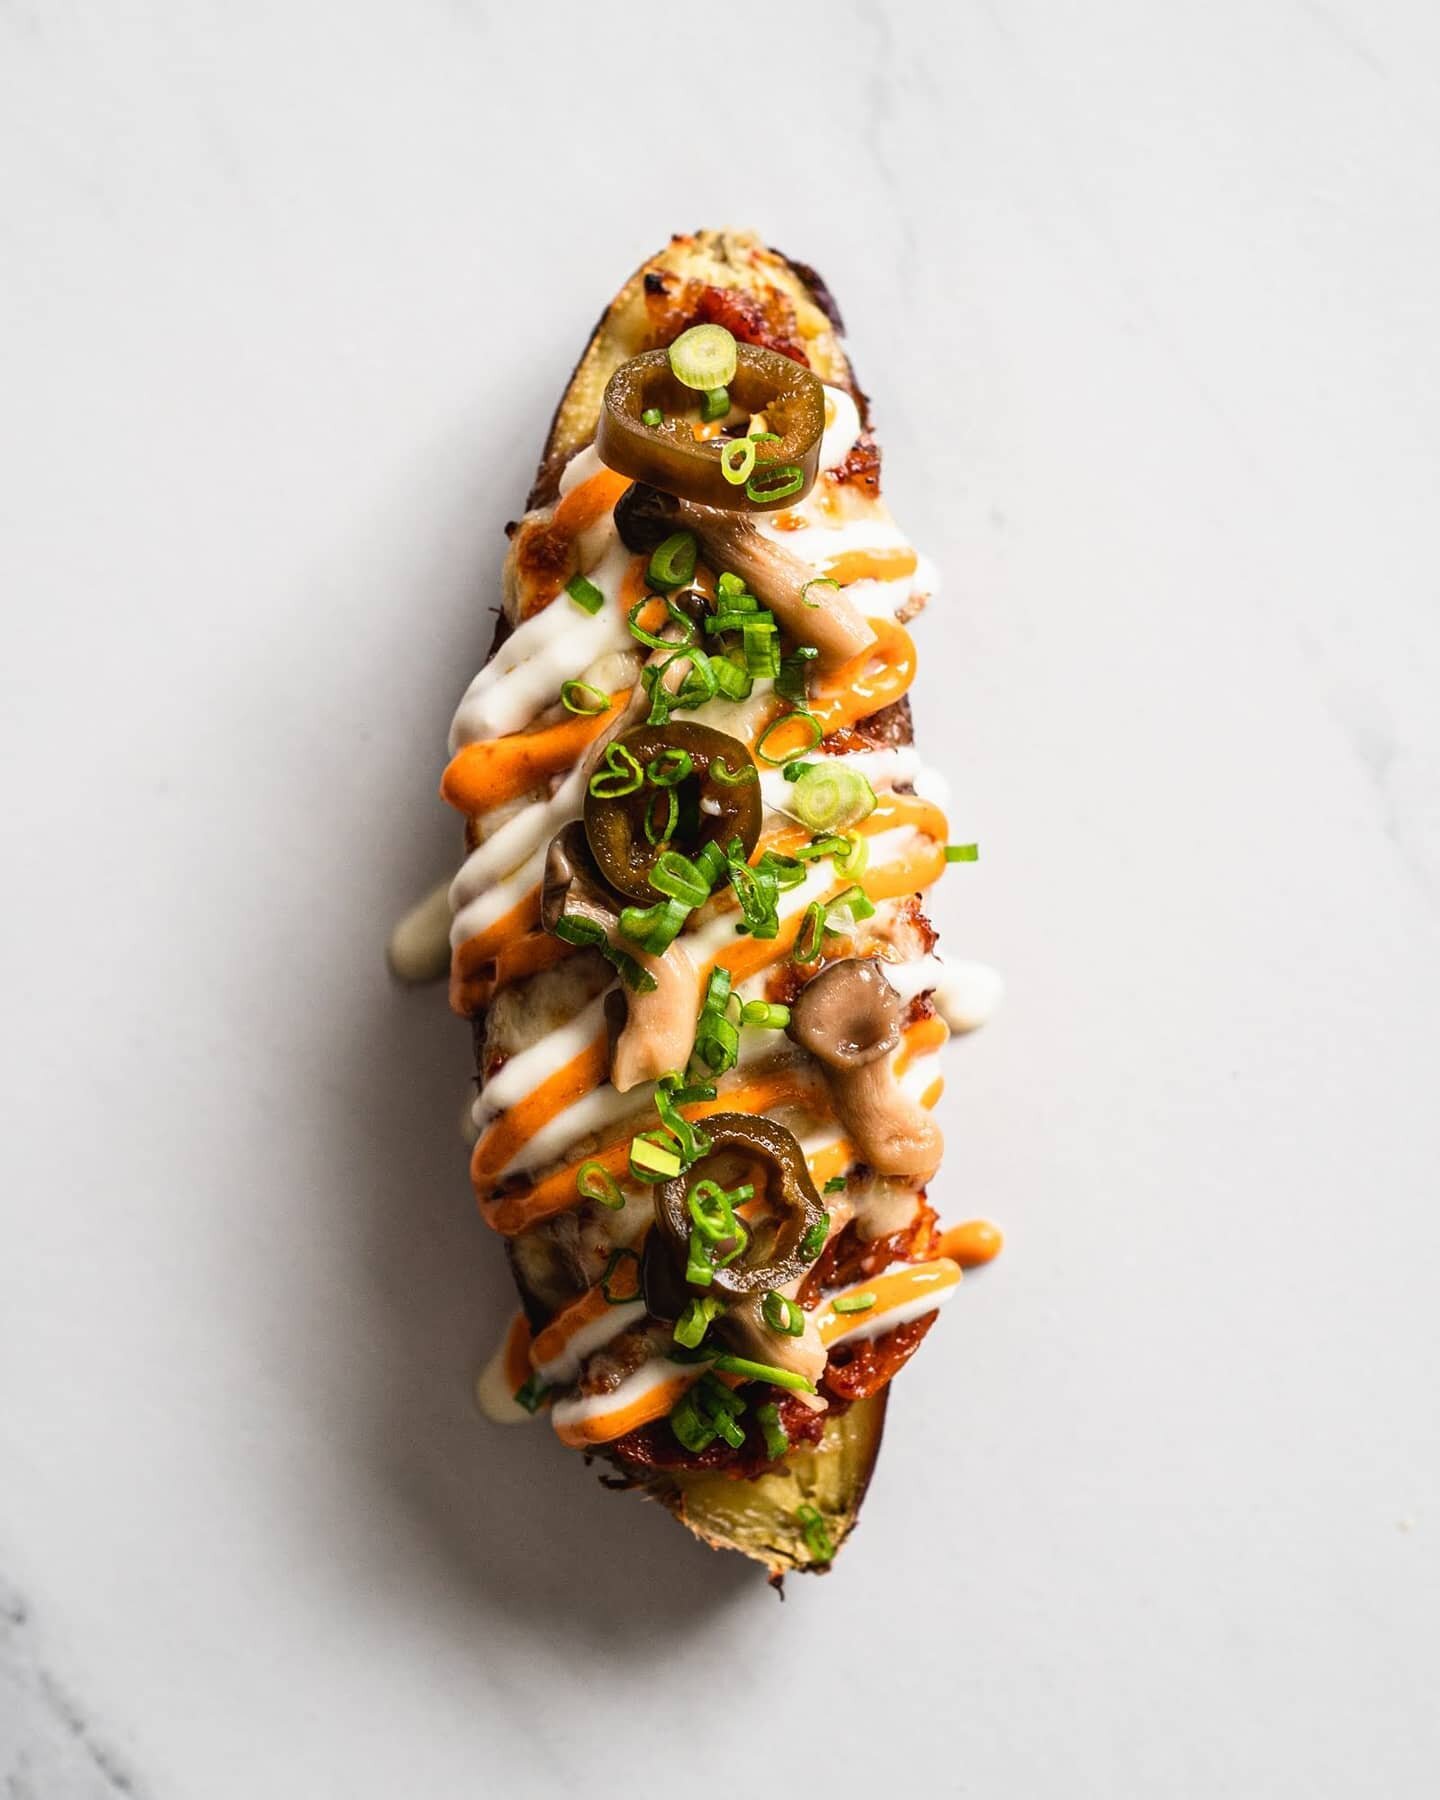 🍠 Loaded Korean sweet potatoes! 🍠
 
Imagine sweet potatoes with a molasses-y, almost chestnut-like sweetness, and a texture so soft it&rsquo;s akin to butter. And on top, it&rsquo;s loaded with kimchi, caramelised onions, and some stretchy, cheese-